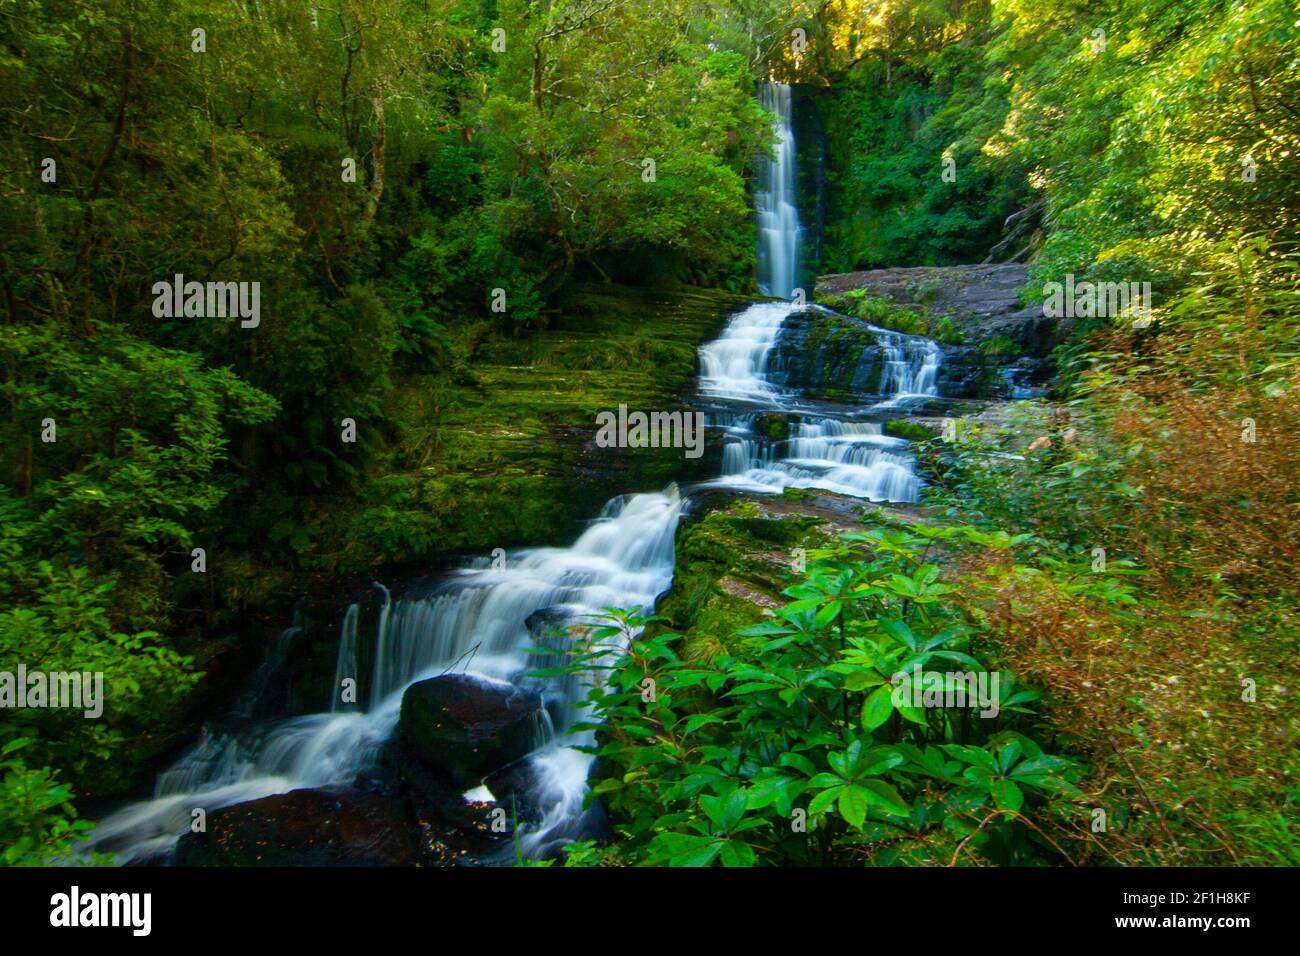 The McLean Falls, cascade waterfall in pure green rainforest, Tautuku River in Catlins Forest Park, South Island New Zealand Stock Photo